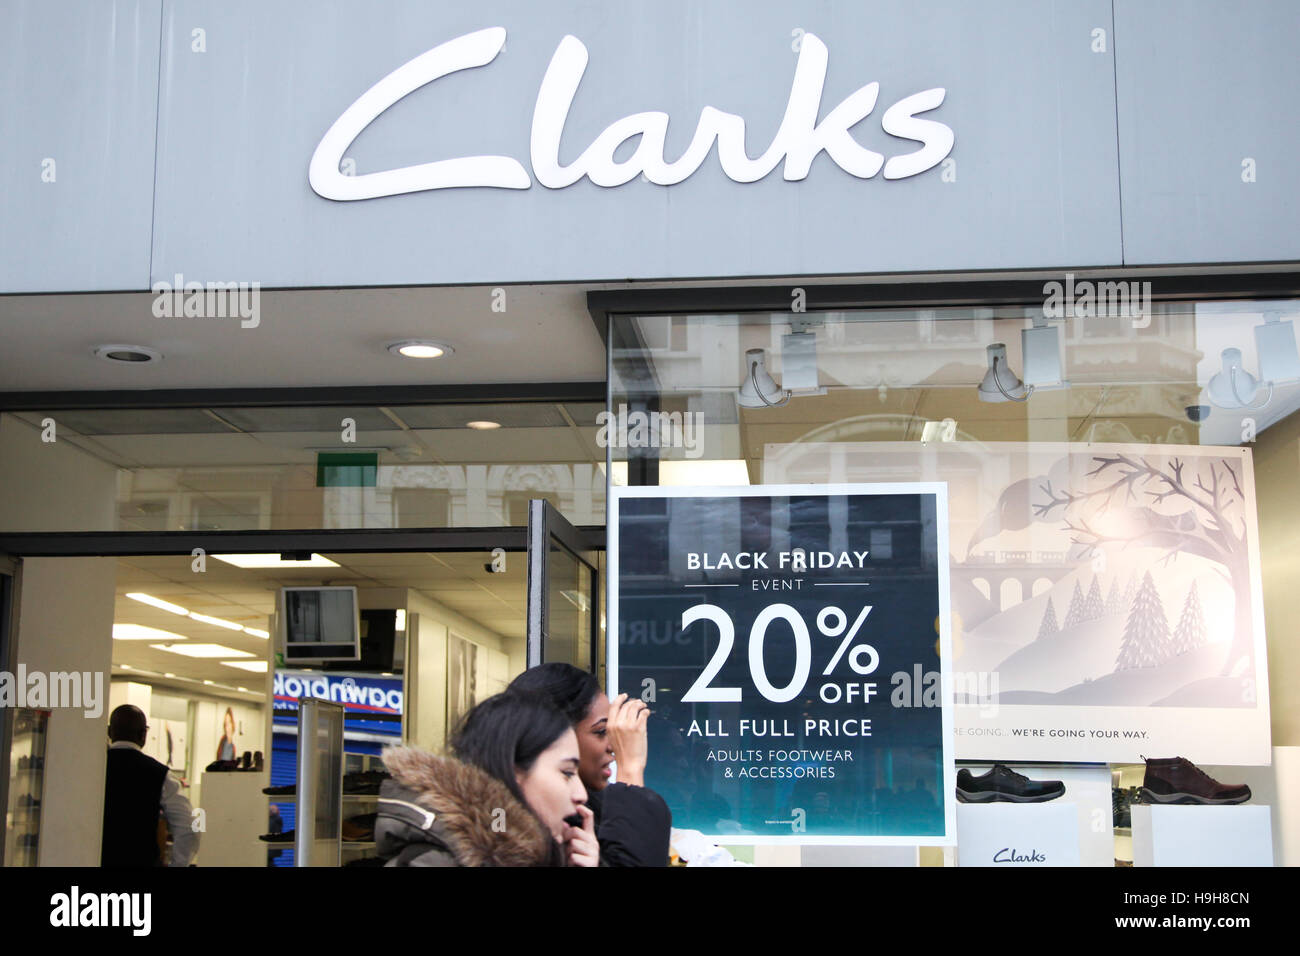 clarks wood green opening hours 